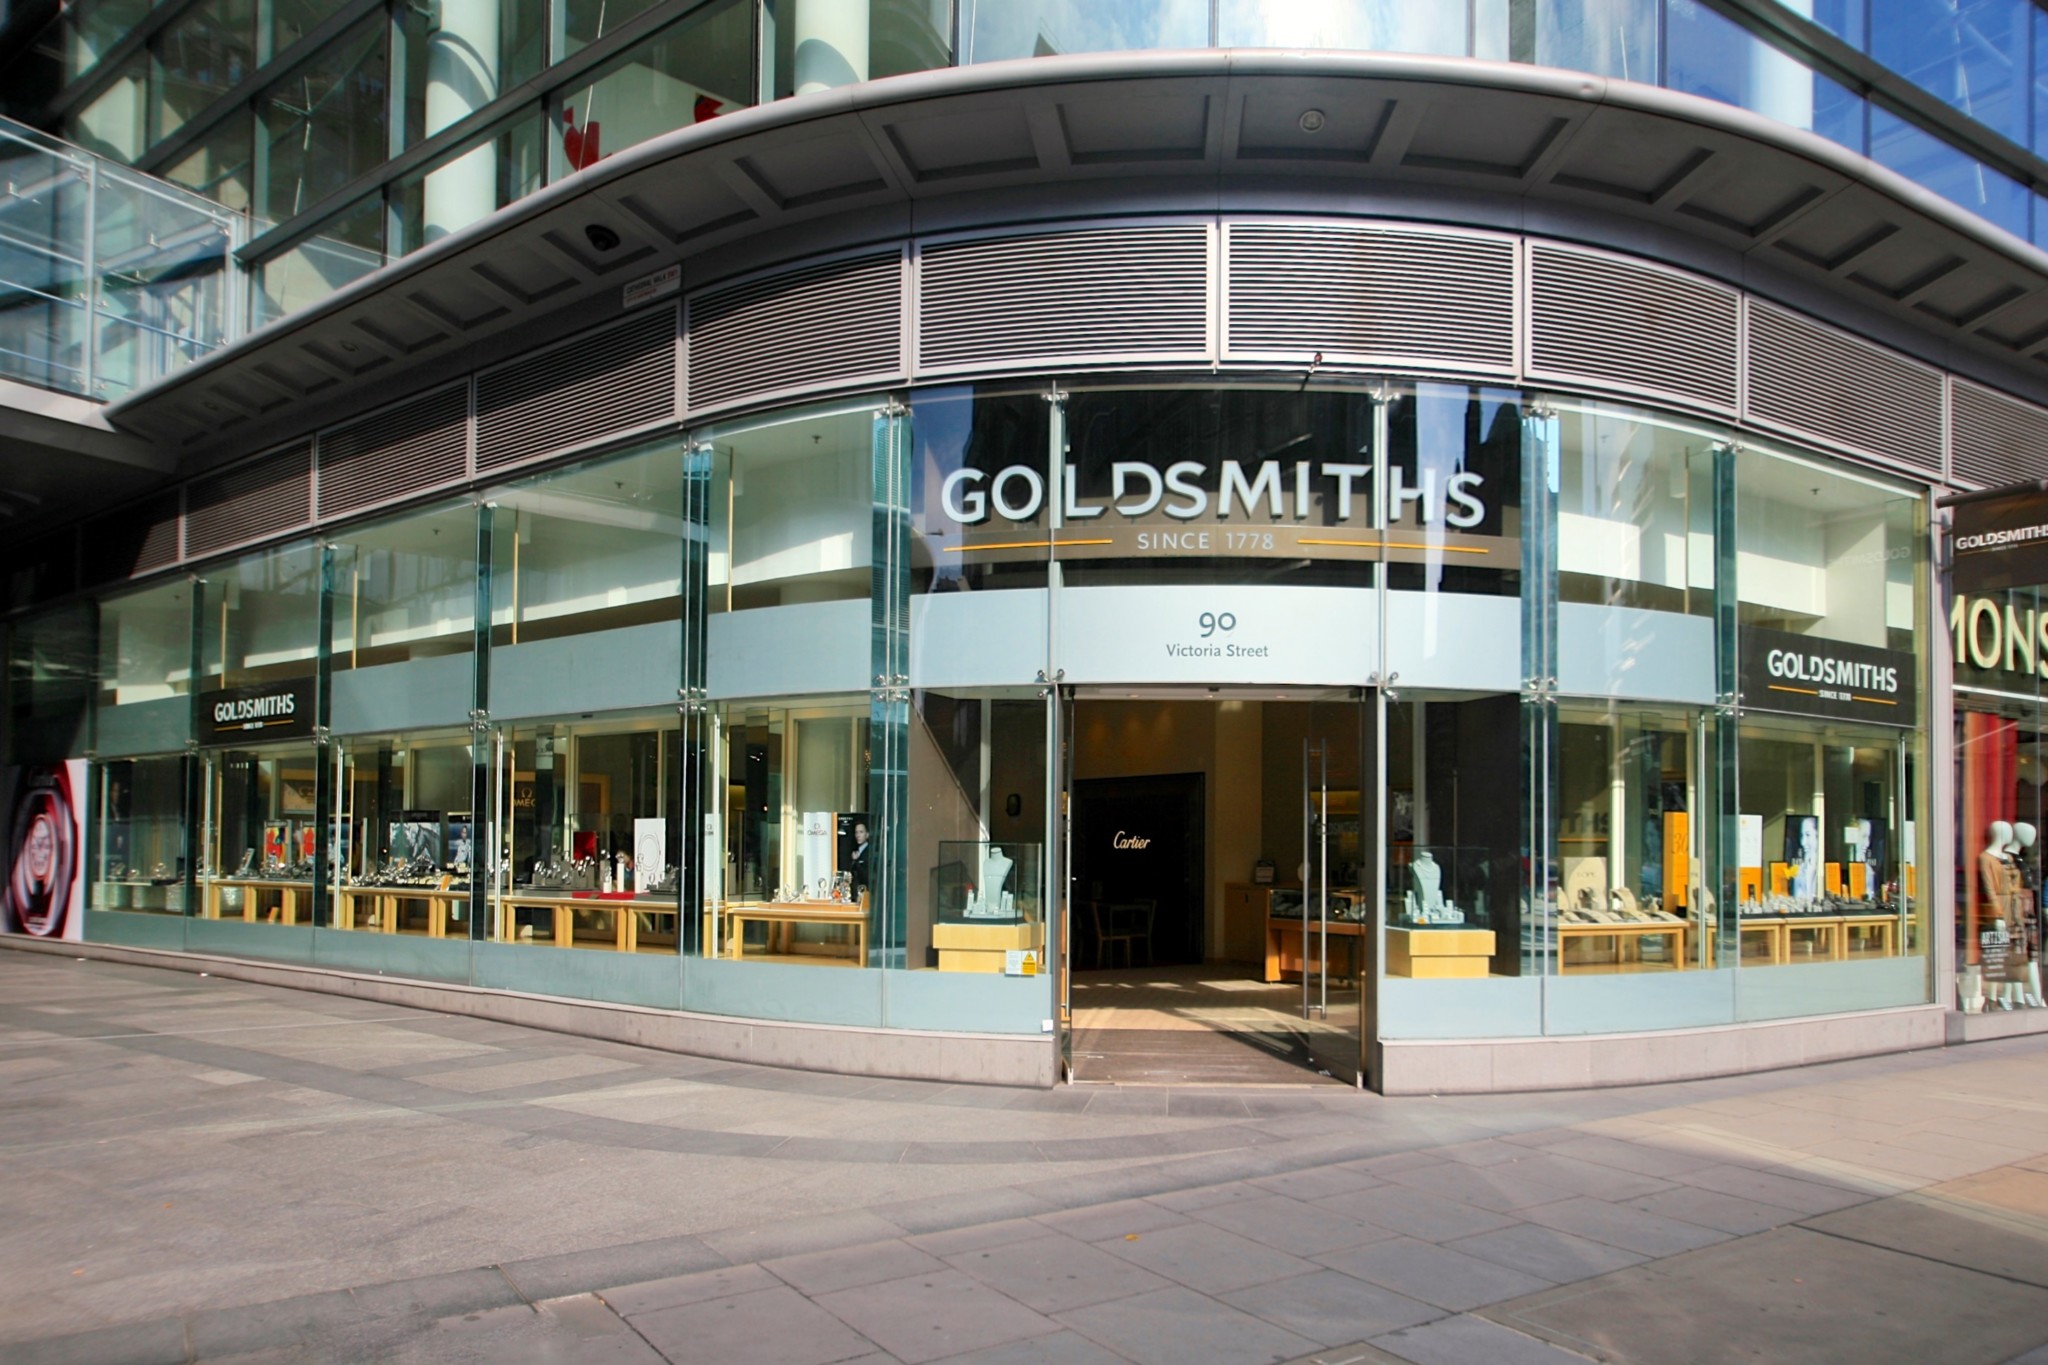 Goldsmiths has been opening new stores and refurbishing others in a programme of creating a luxury environment for watch sales.